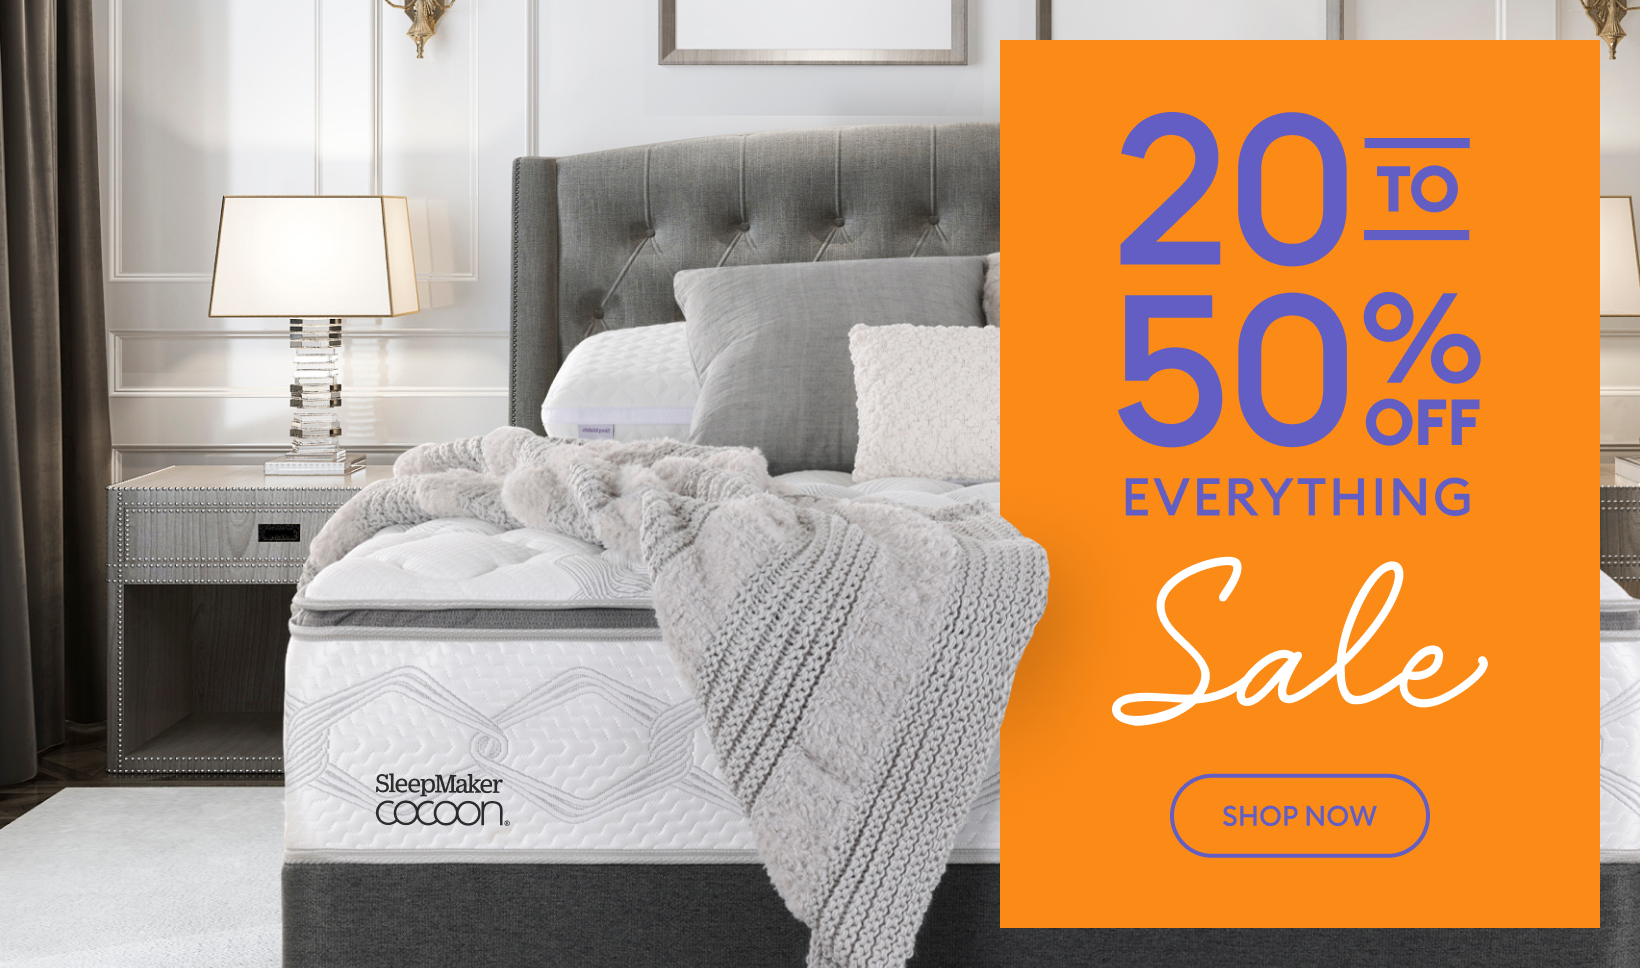 20-50% off Everything Campaign | Bedshed